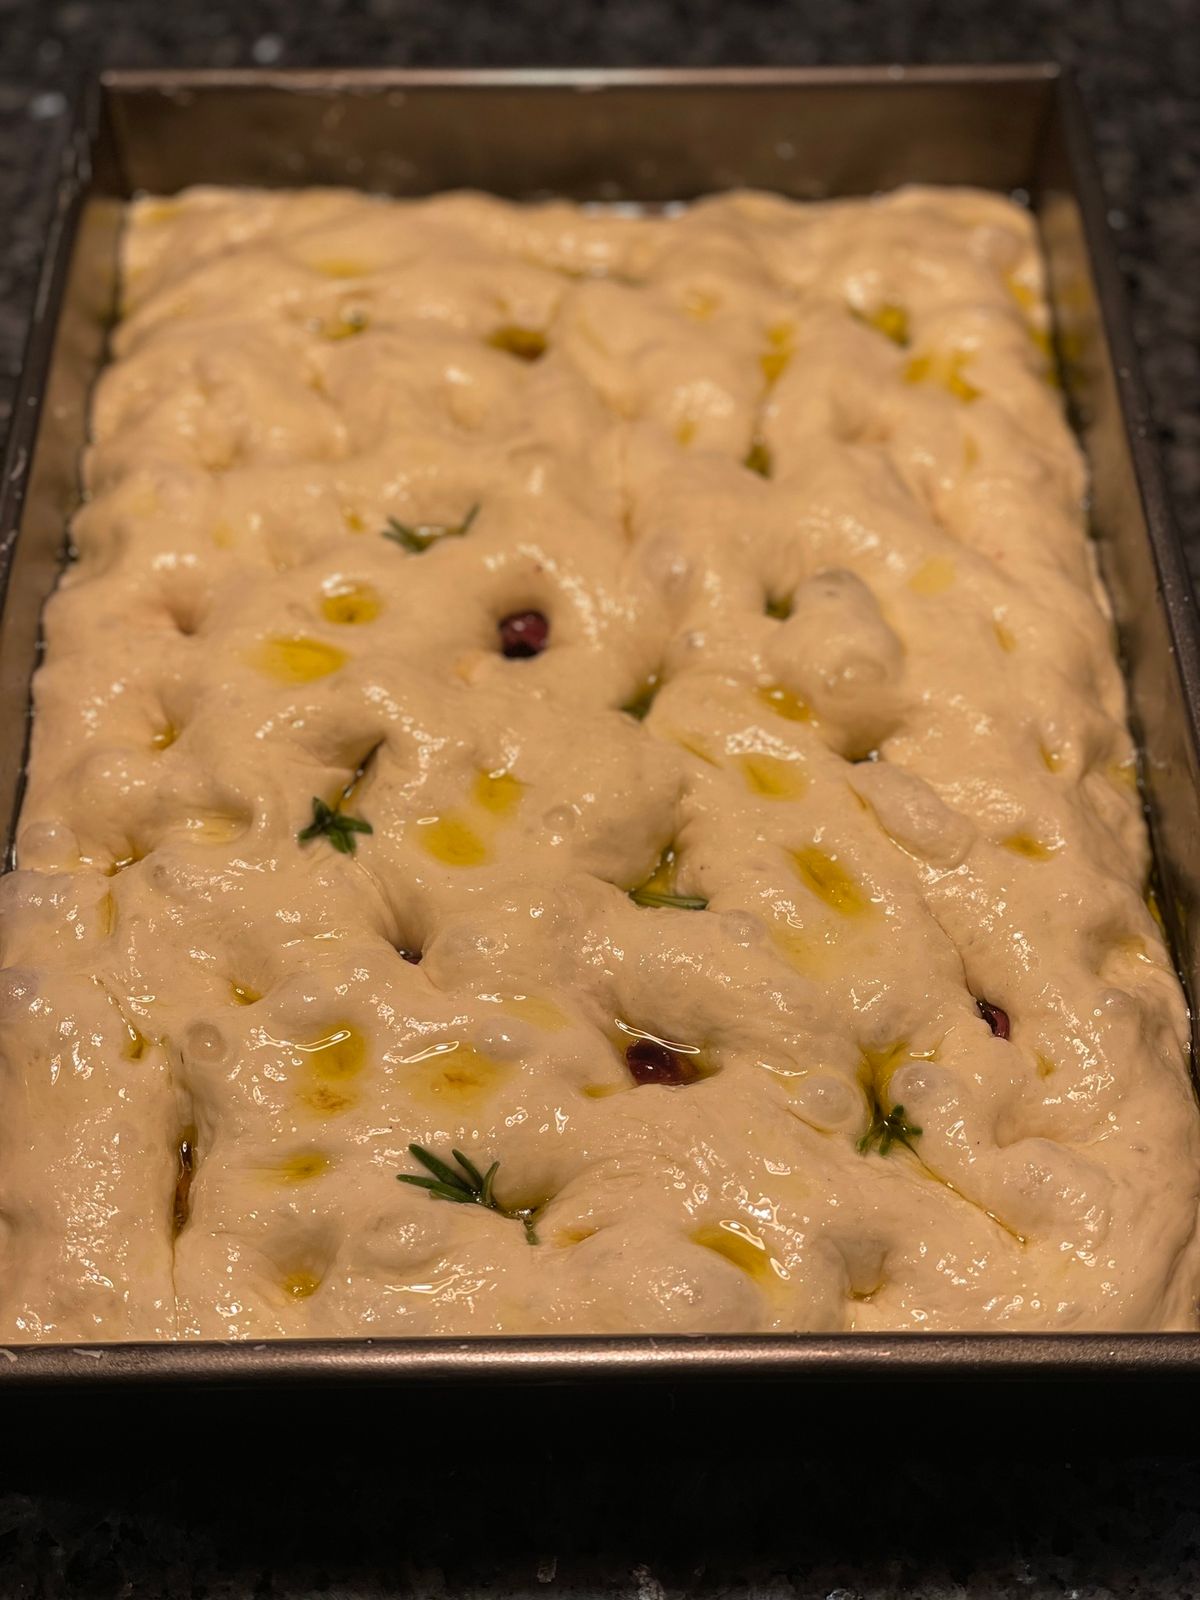 Sold out - Learn to bake Focaccia ?